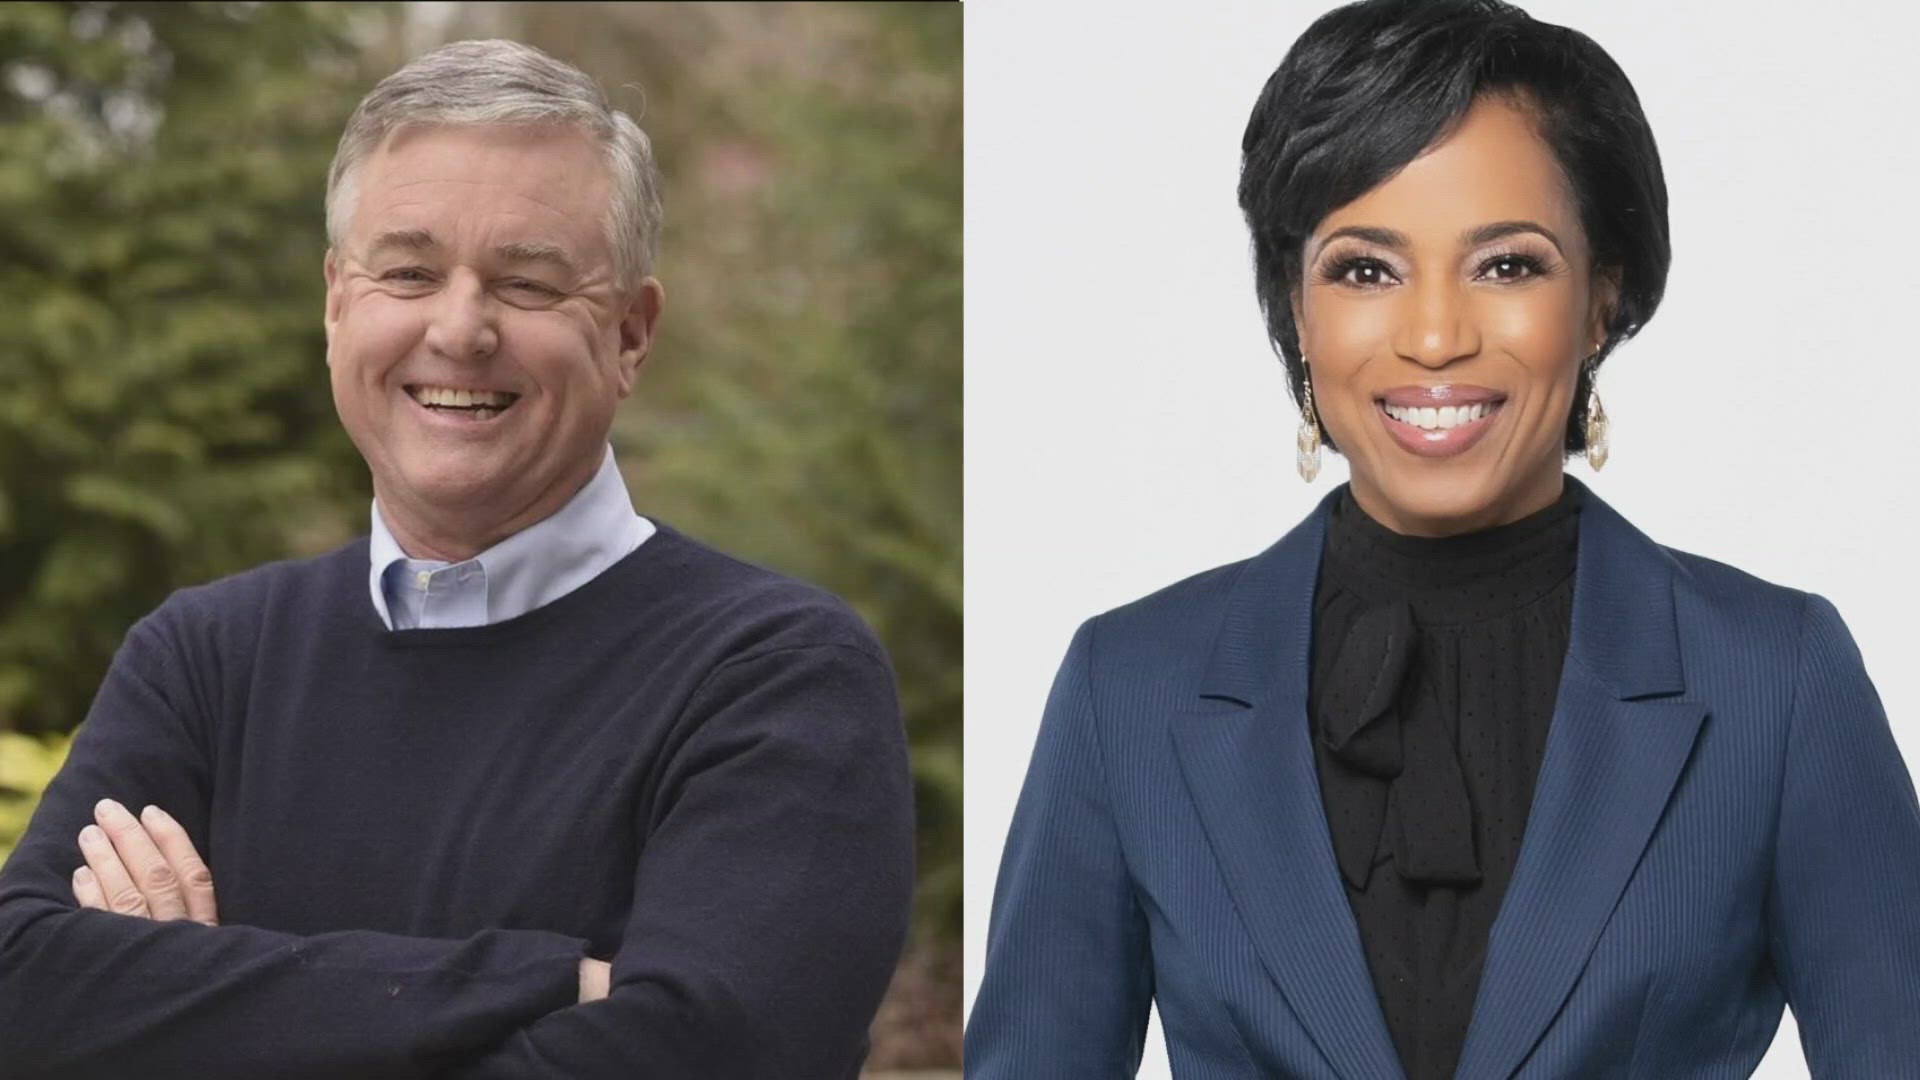 All eyes are on the open Democratic Senate race between Maryland Congressman David Trone and Prince George's County Executive Angela Alsobrooks.